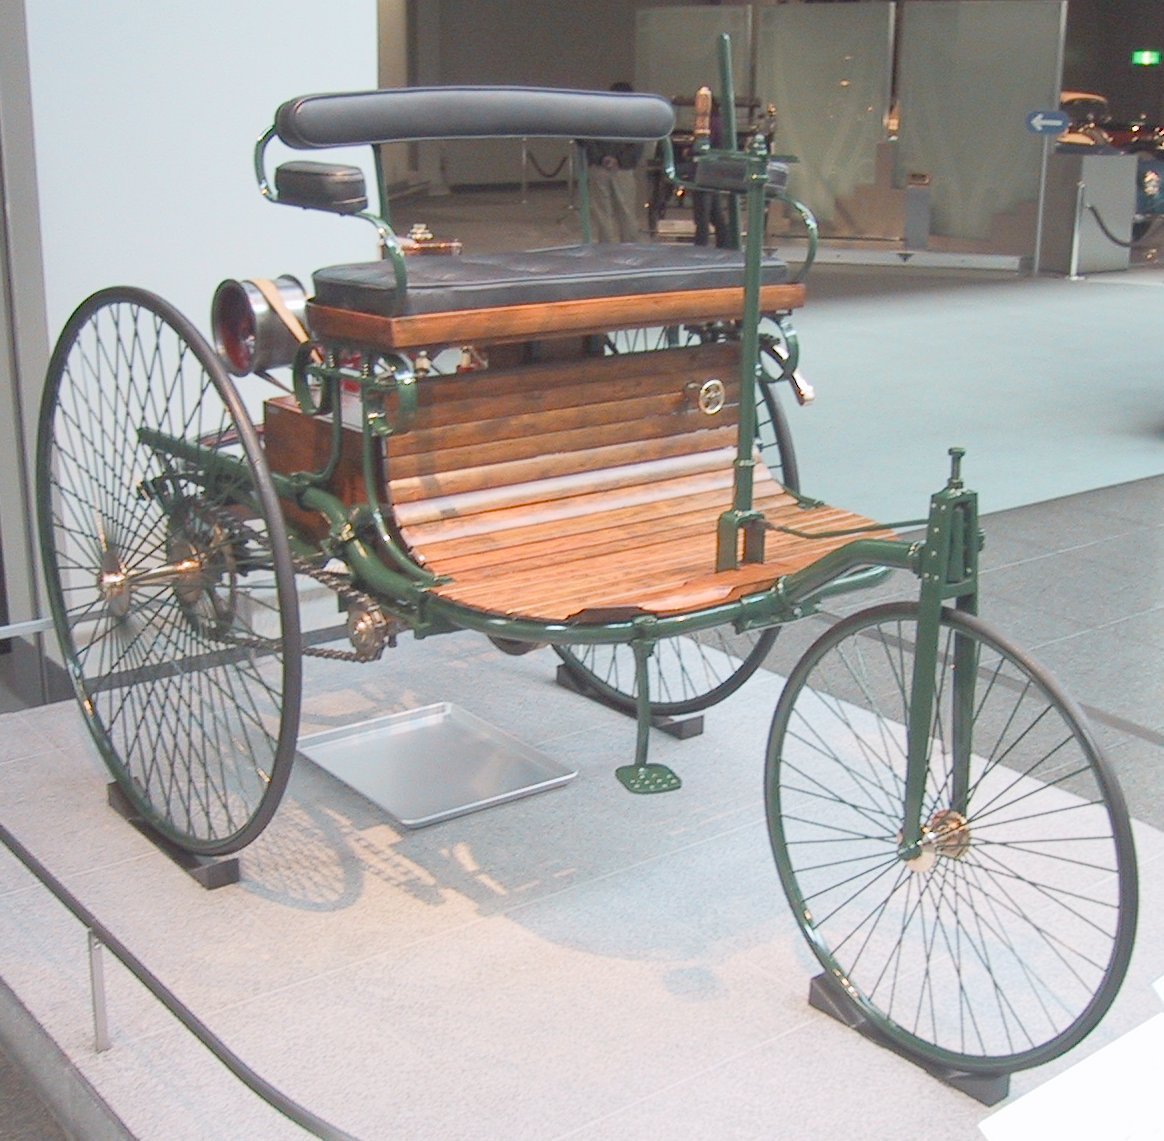 Benz Patent-Motorwagen Photo Gallery: Photo #03 out of 12, Image ...